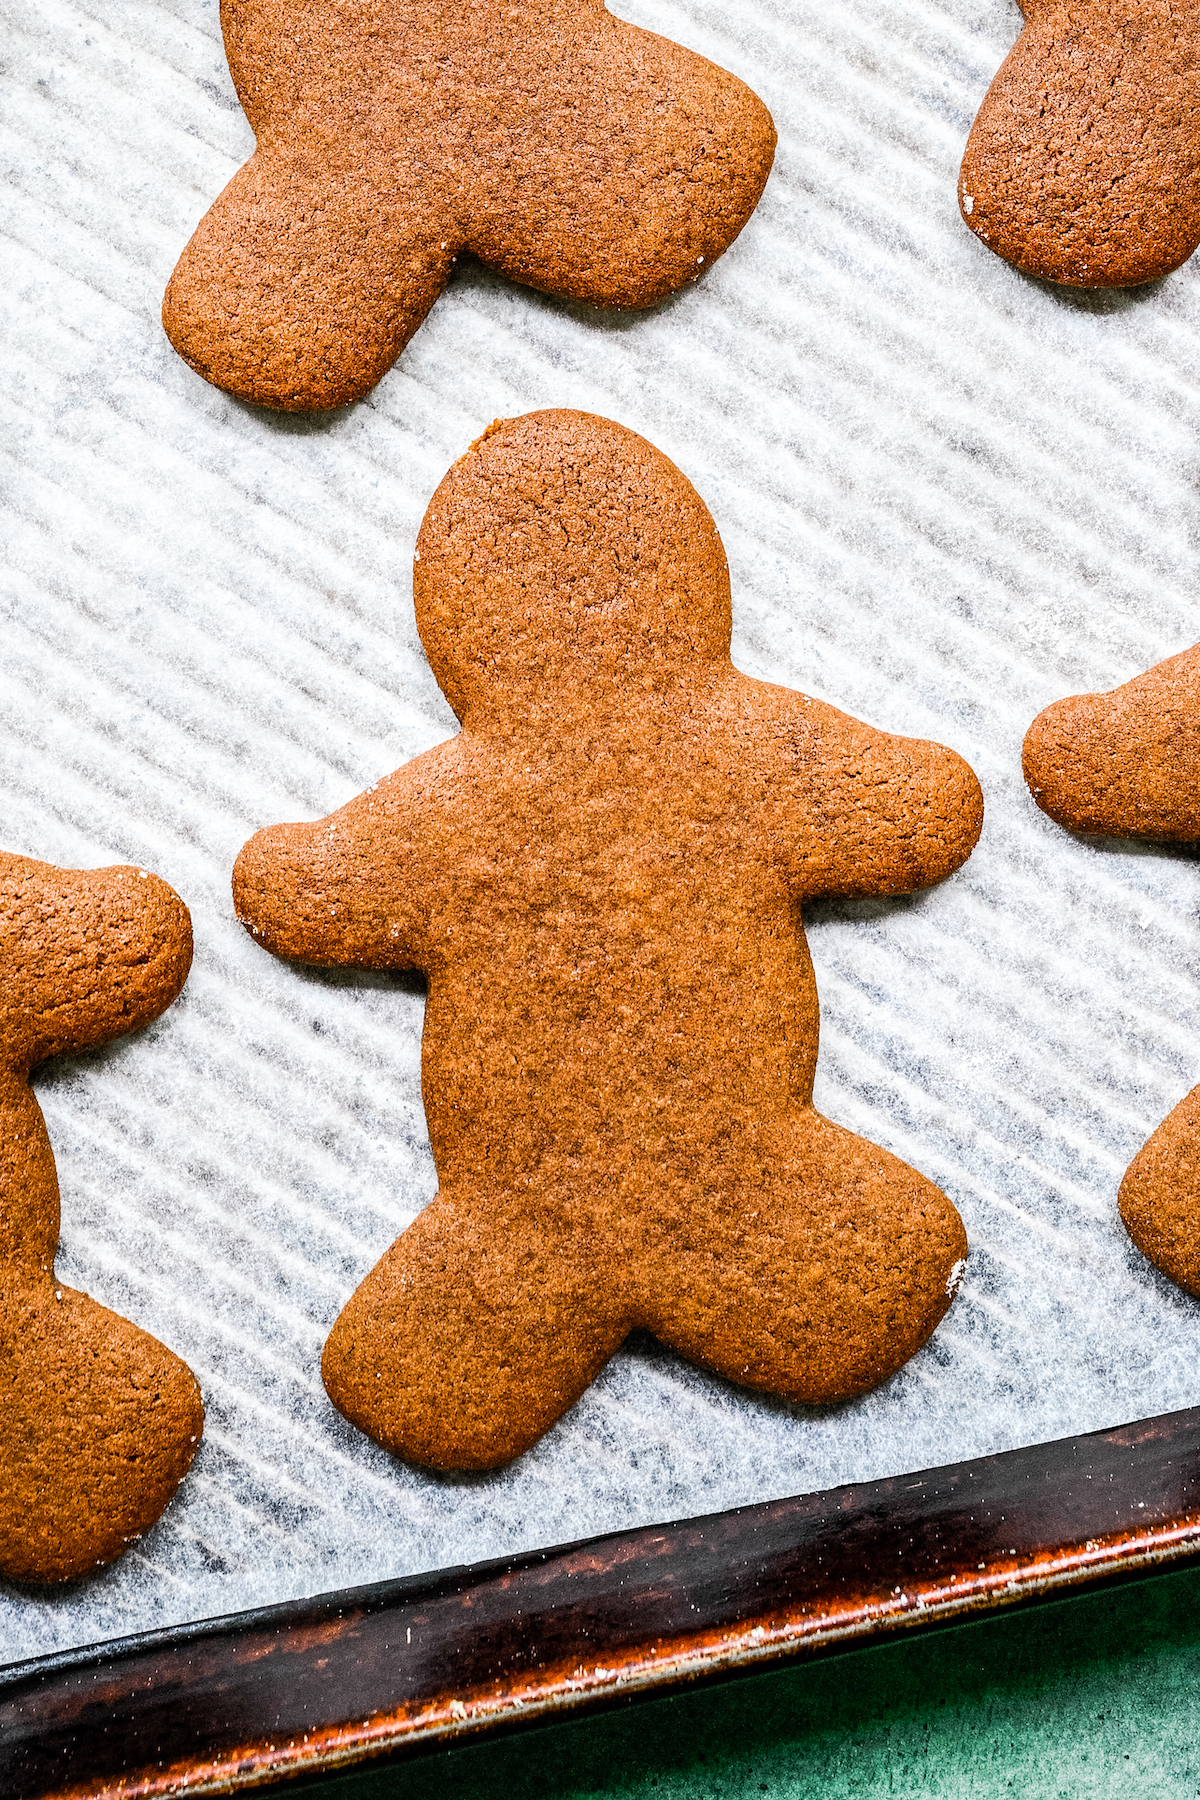 Baked gingerbread men on a cookie sheet.